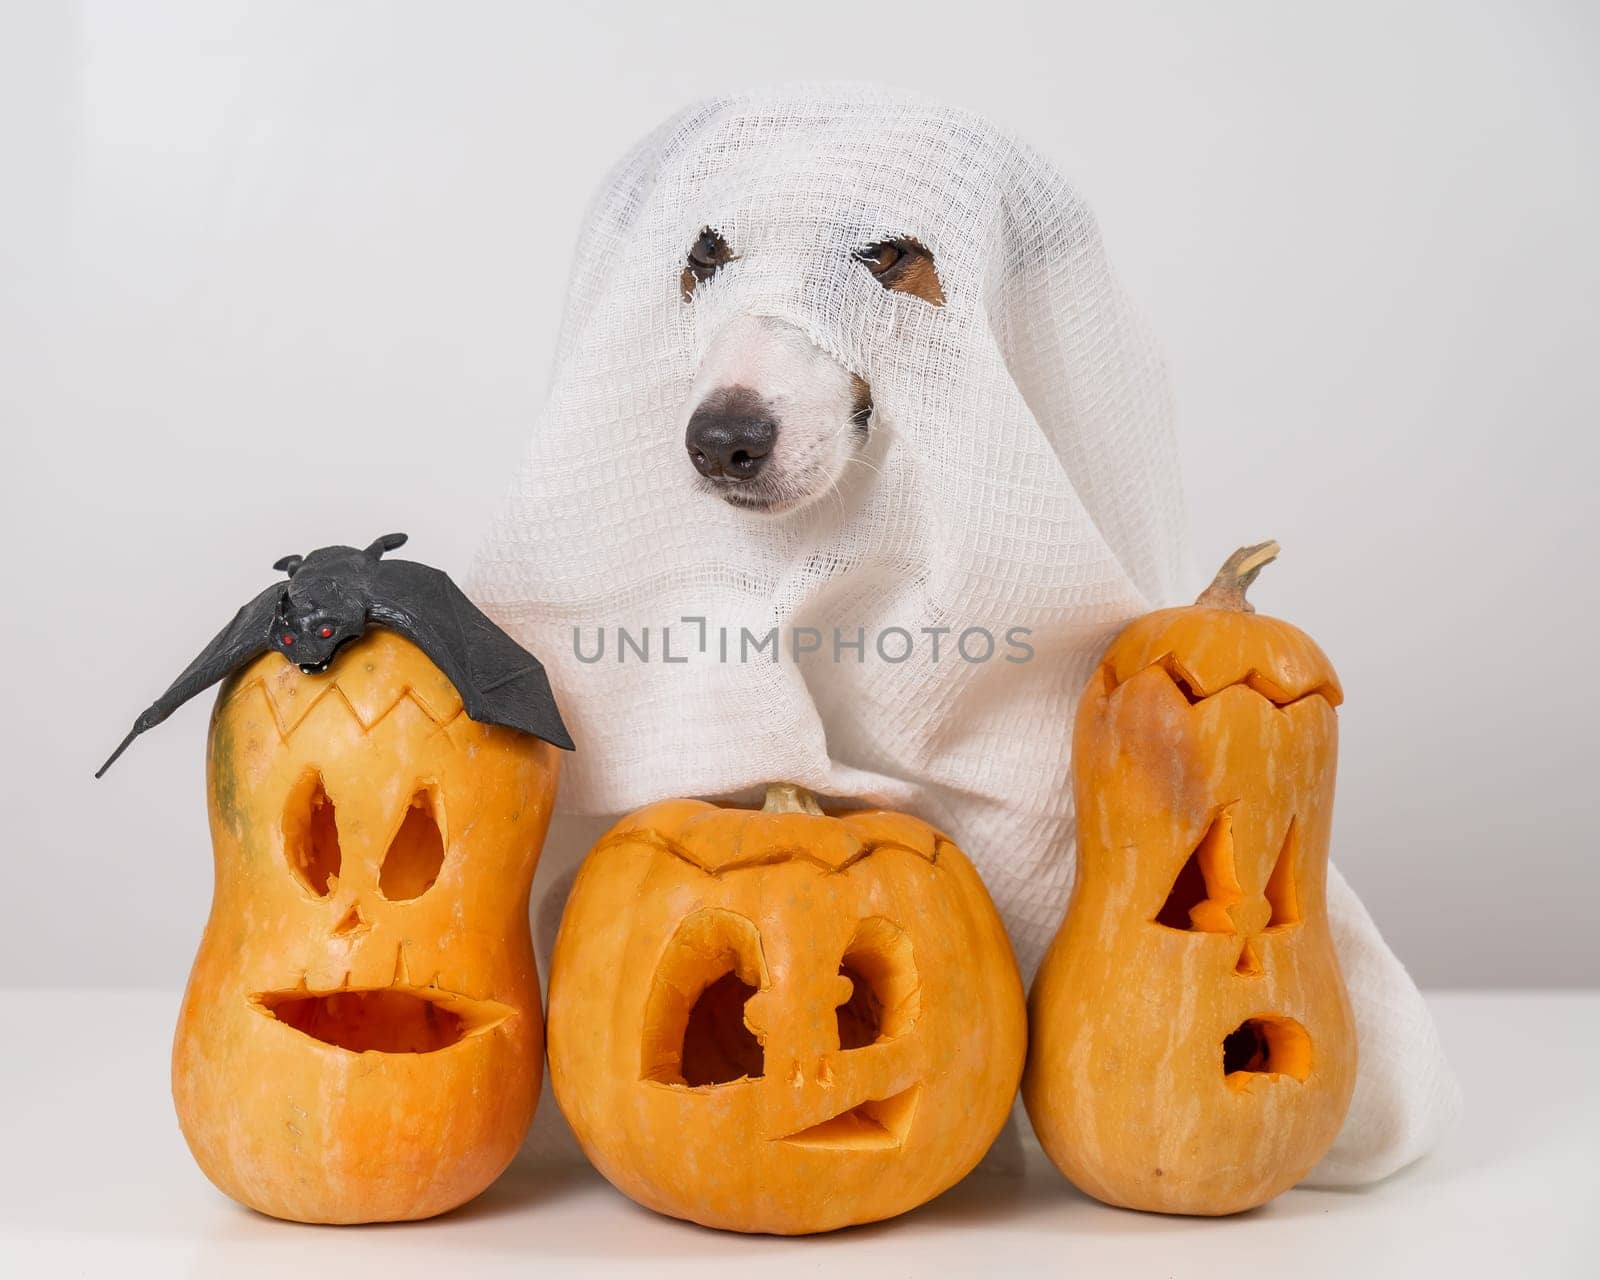 Jack Russell Terrier dog in a ghost costume and three jack-o-lanterns on a white background. by mrwed54